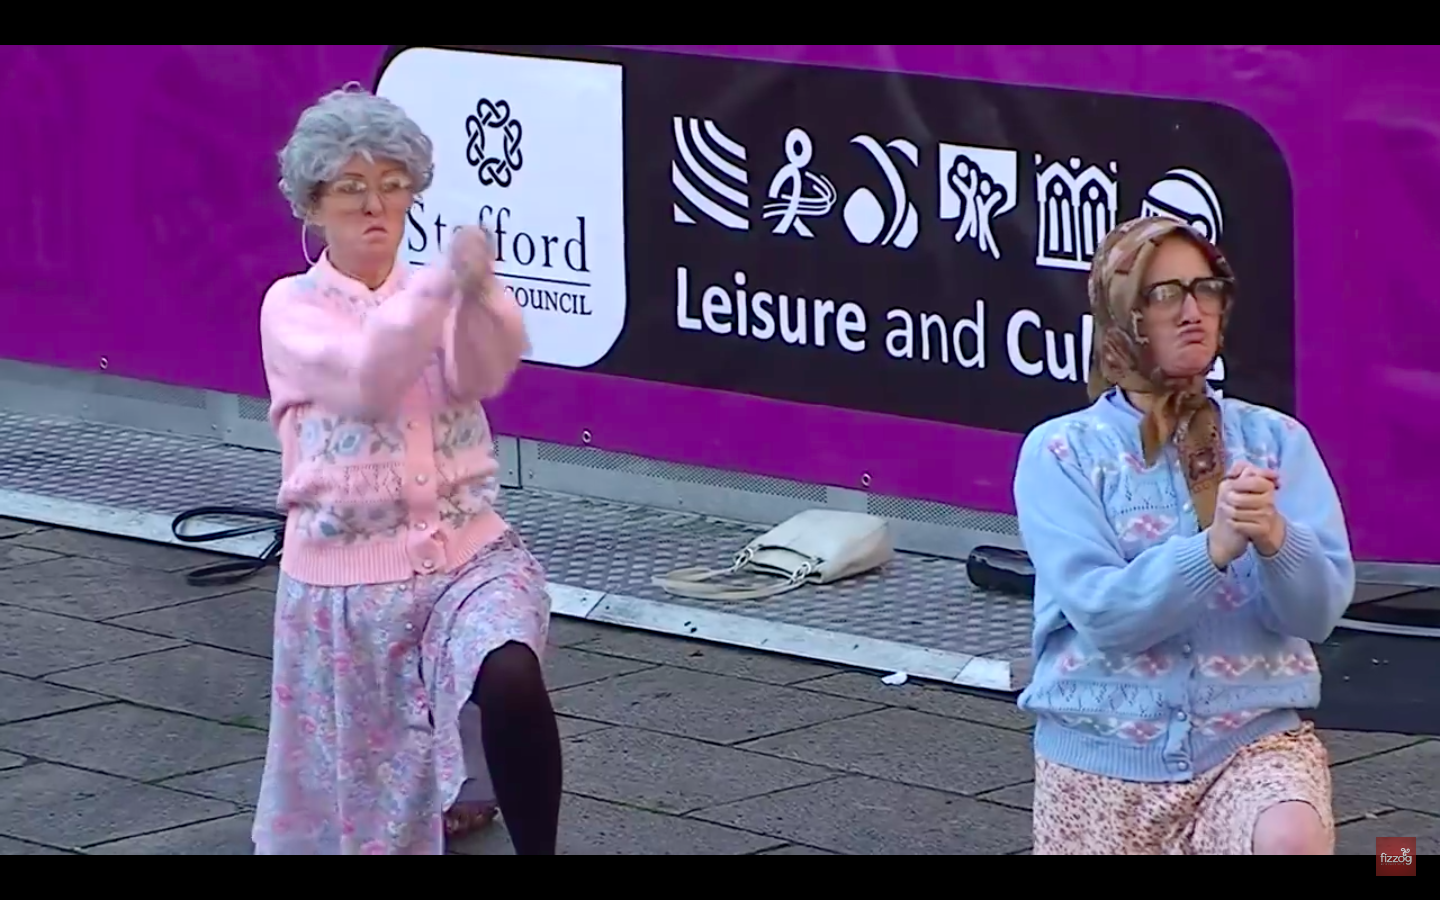 Four “Dancing Grannies” Take Internet By Storm, But They Aren’t Who They Say They Are